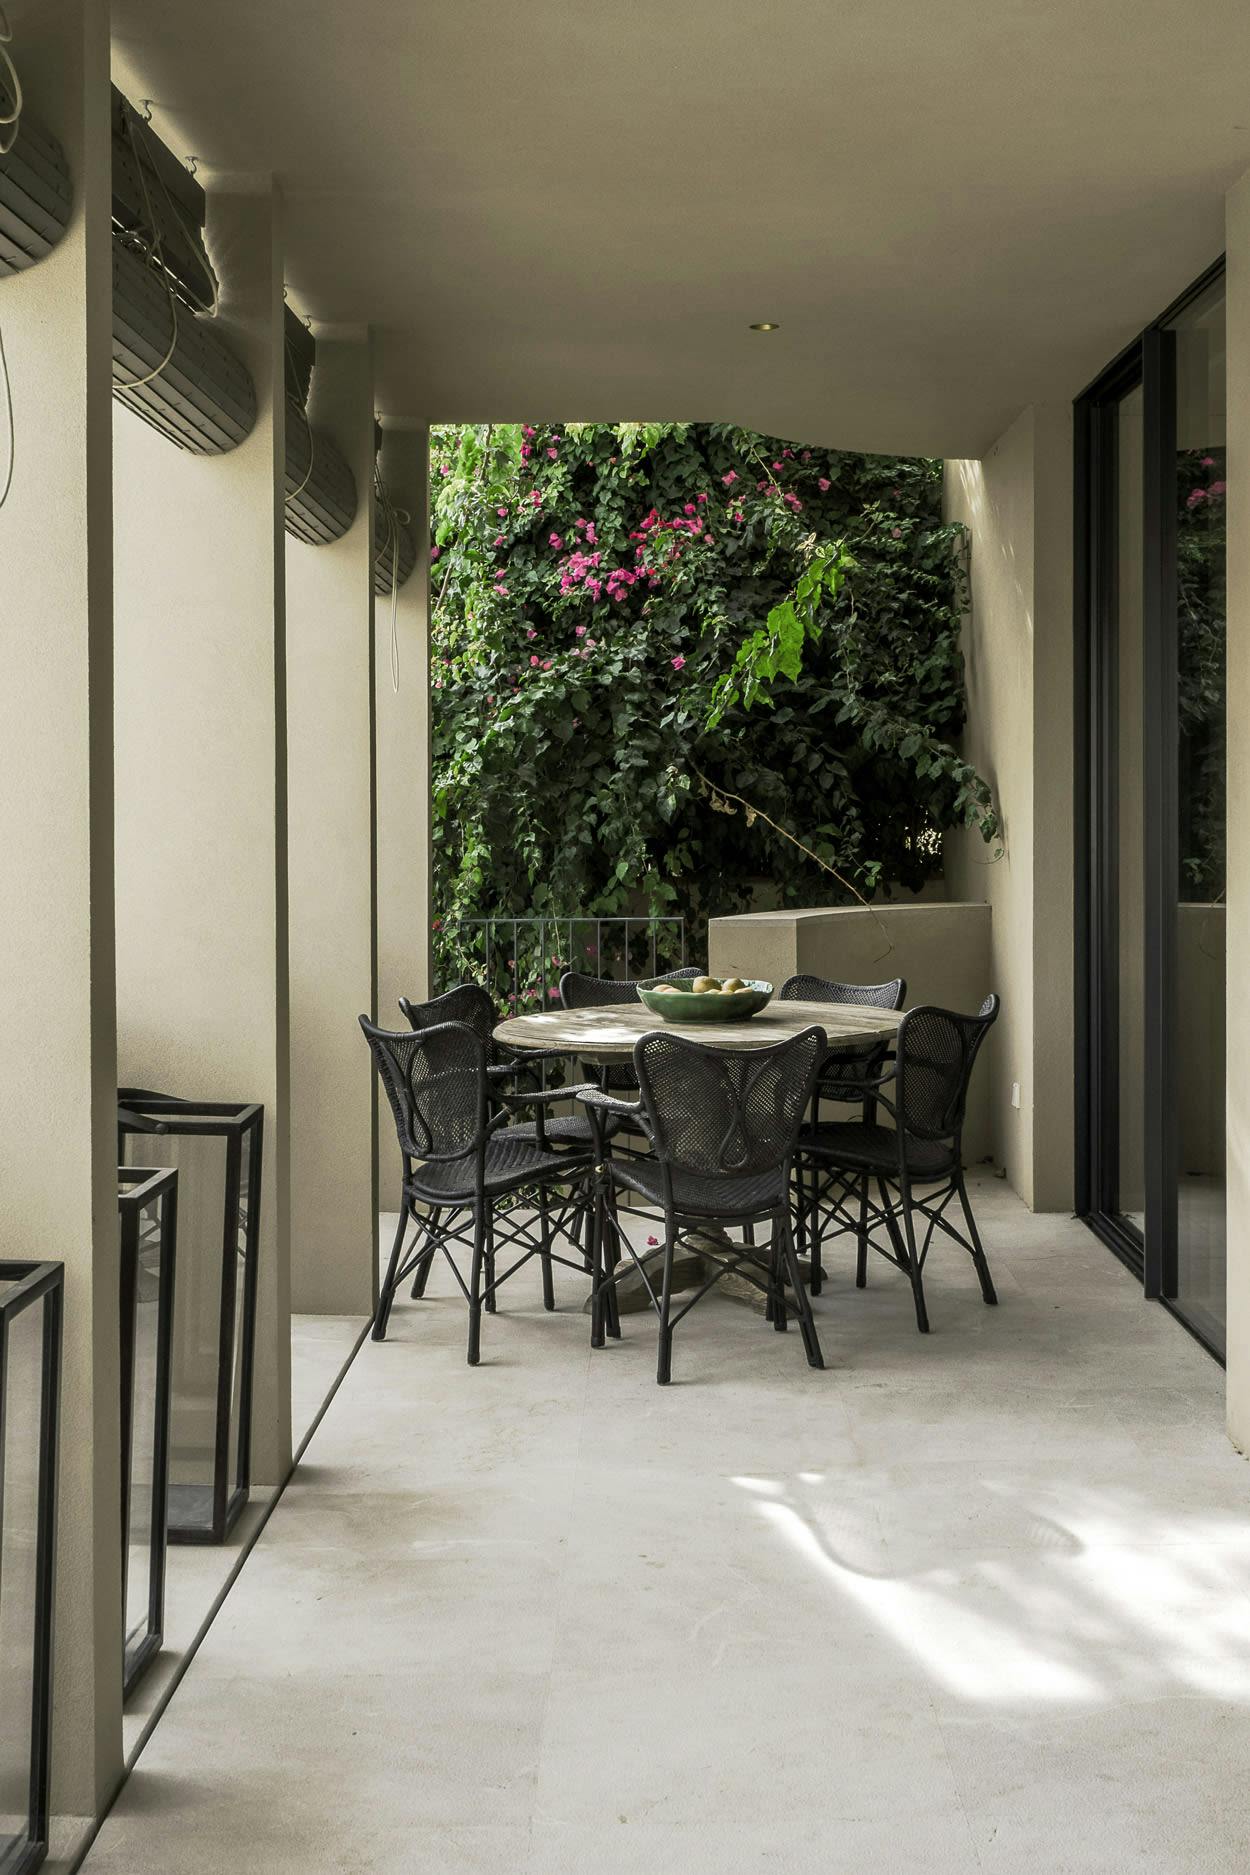 The image features a patio area with a table and chairs, a dining table, and a potted plant.